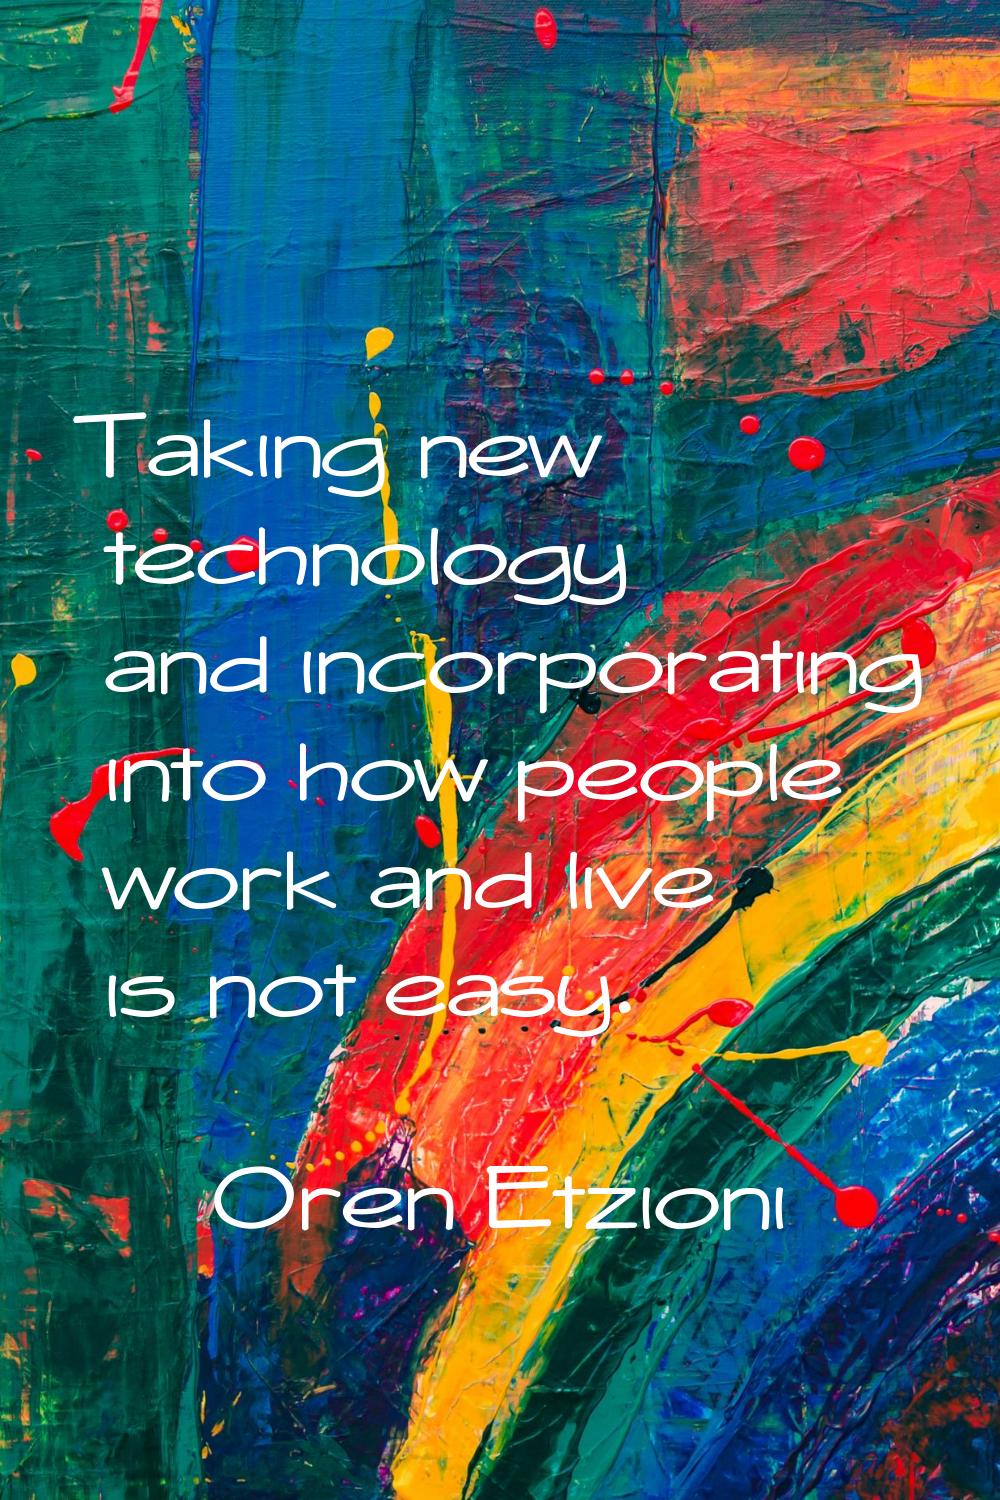 Taking new technology and incorporating into how people work and live is not easy.